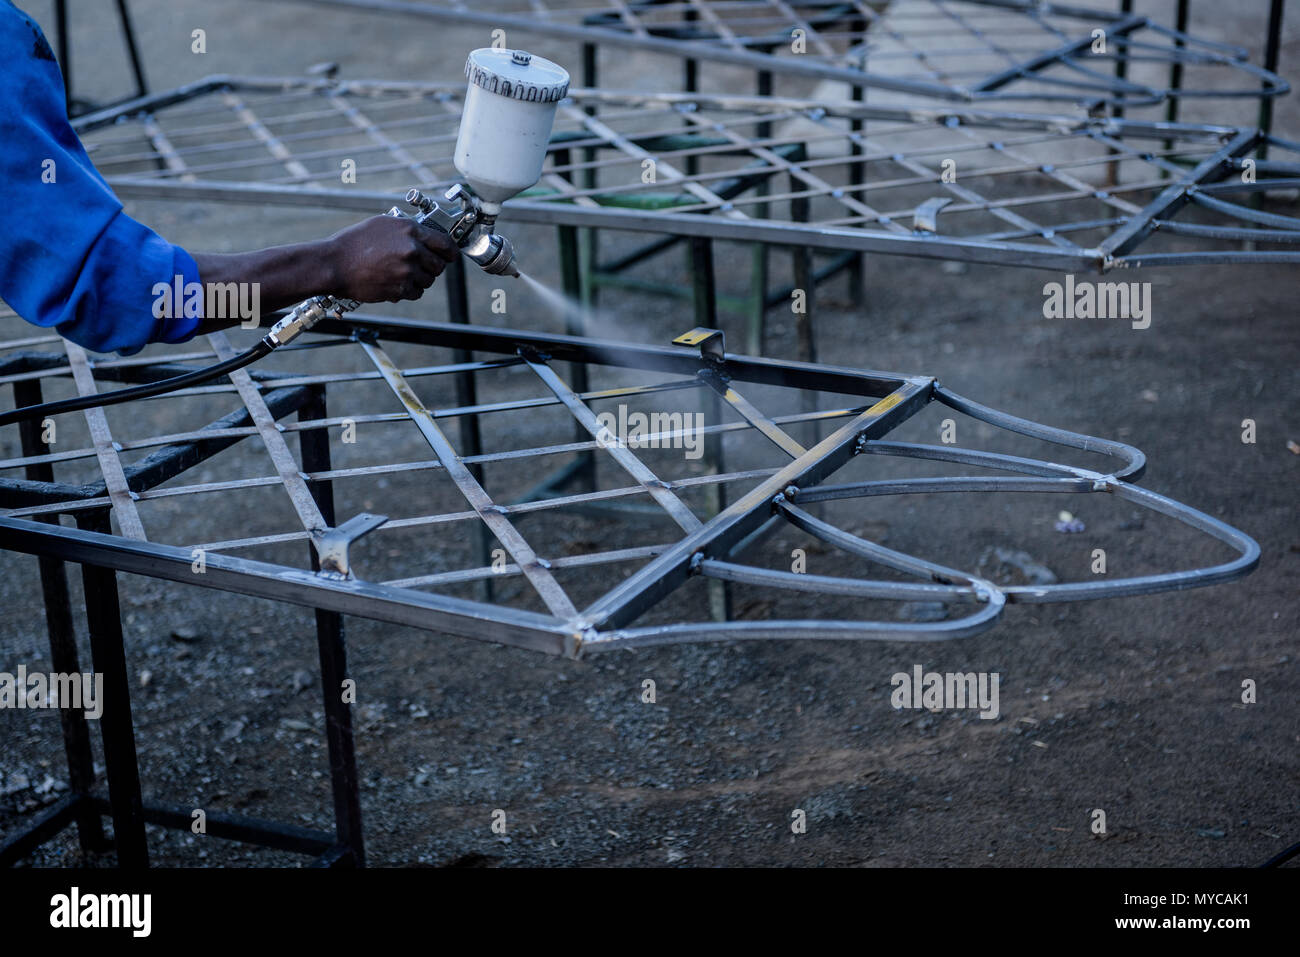 A worker sealing the metal table with a spray gun Stock Photo